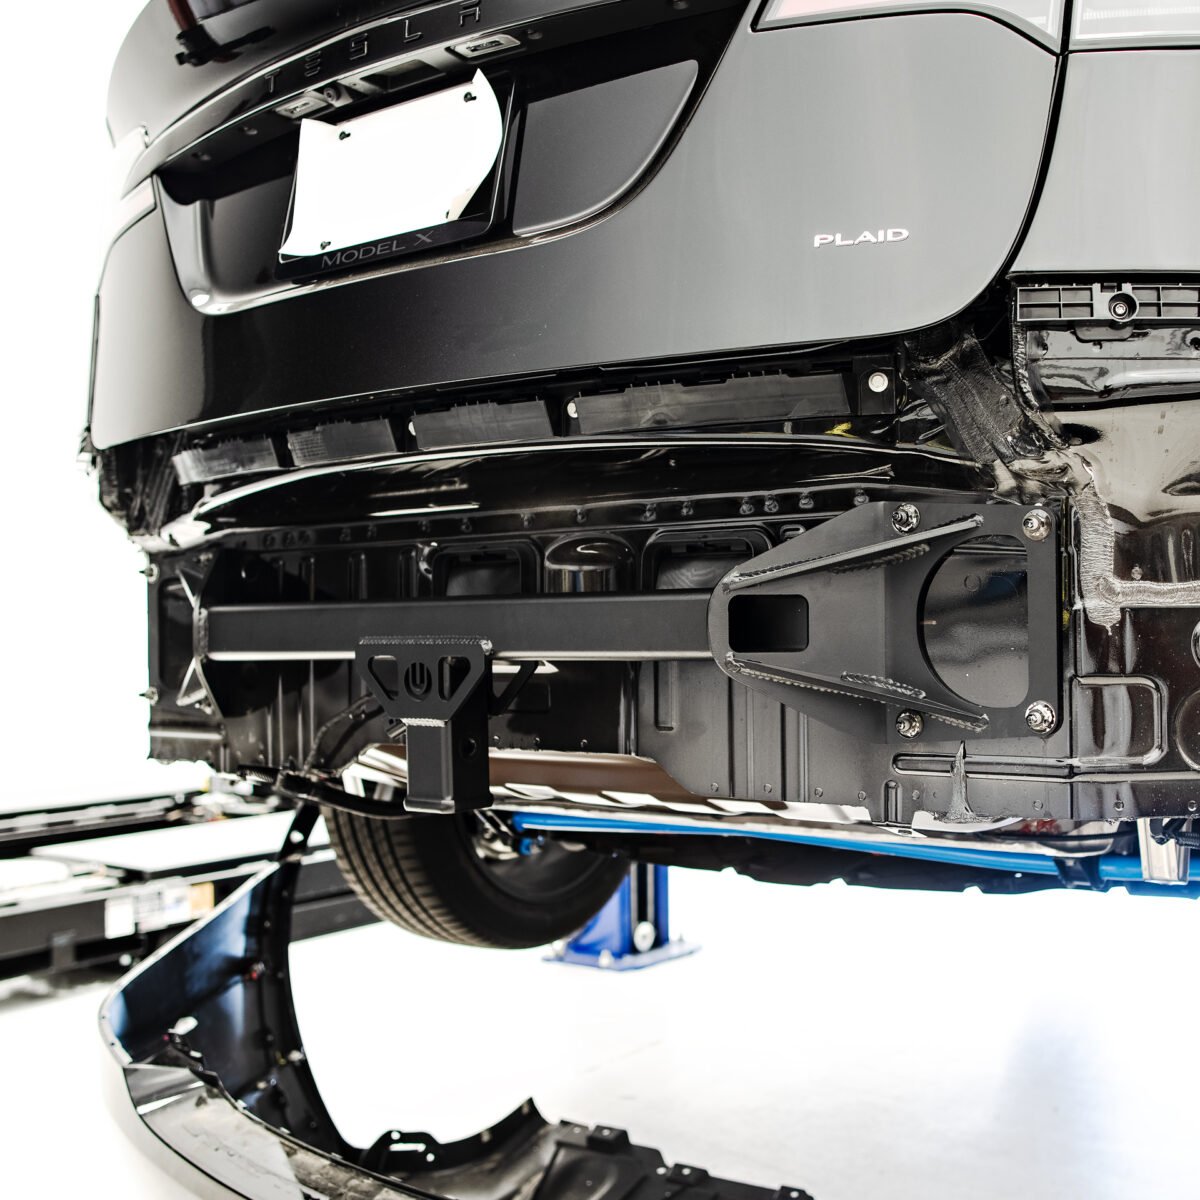 Unplugged Performance - Model S/X Lightweight Tow Hitch Kit 5000LB Capacity 2021+.